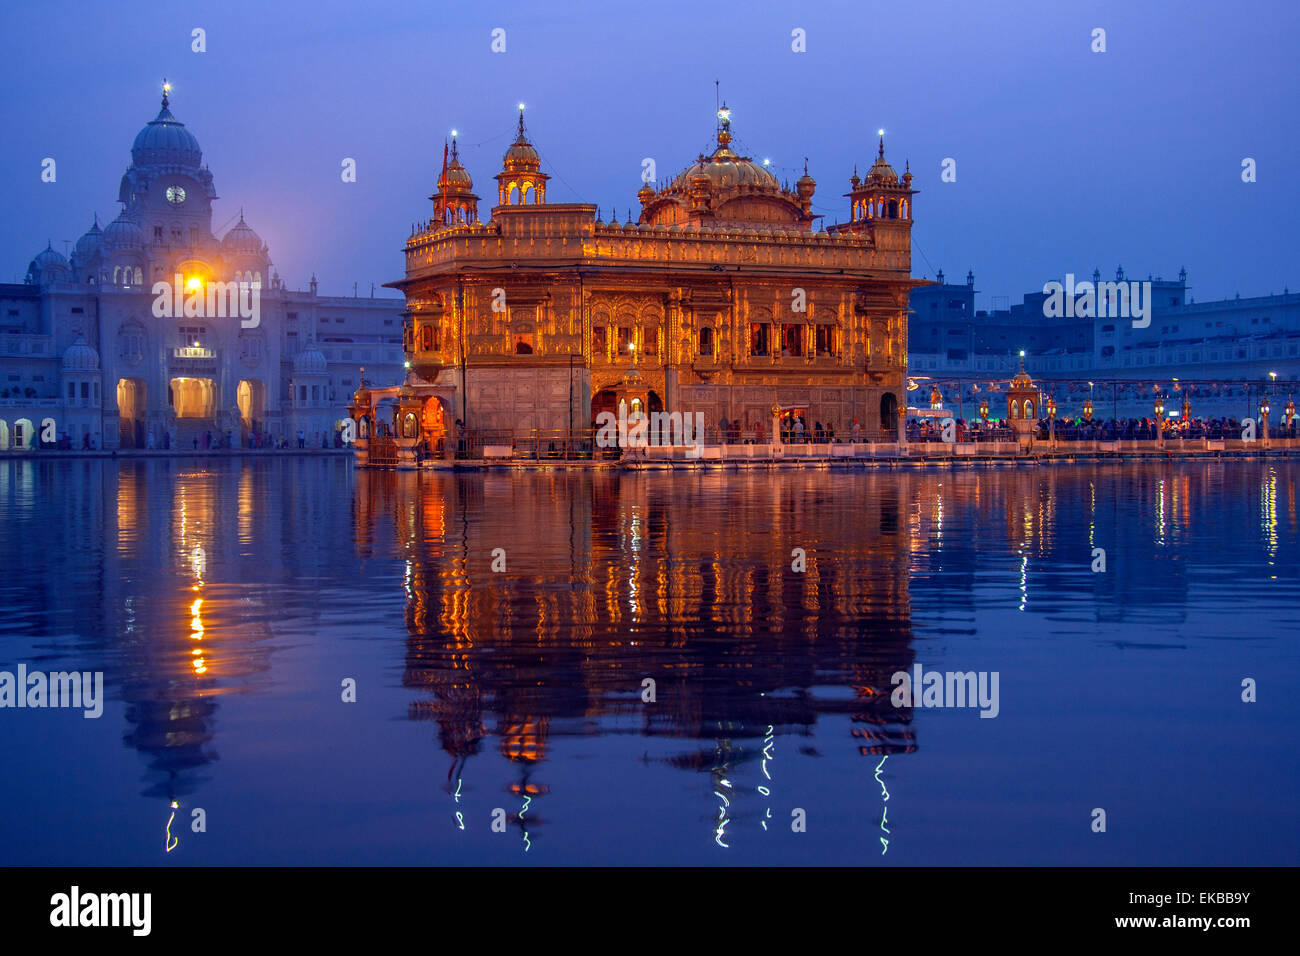 The Golden Temple or Harmandir Sahib in the city of Amritsar in the Punjab region of northwest India. Stock Photo